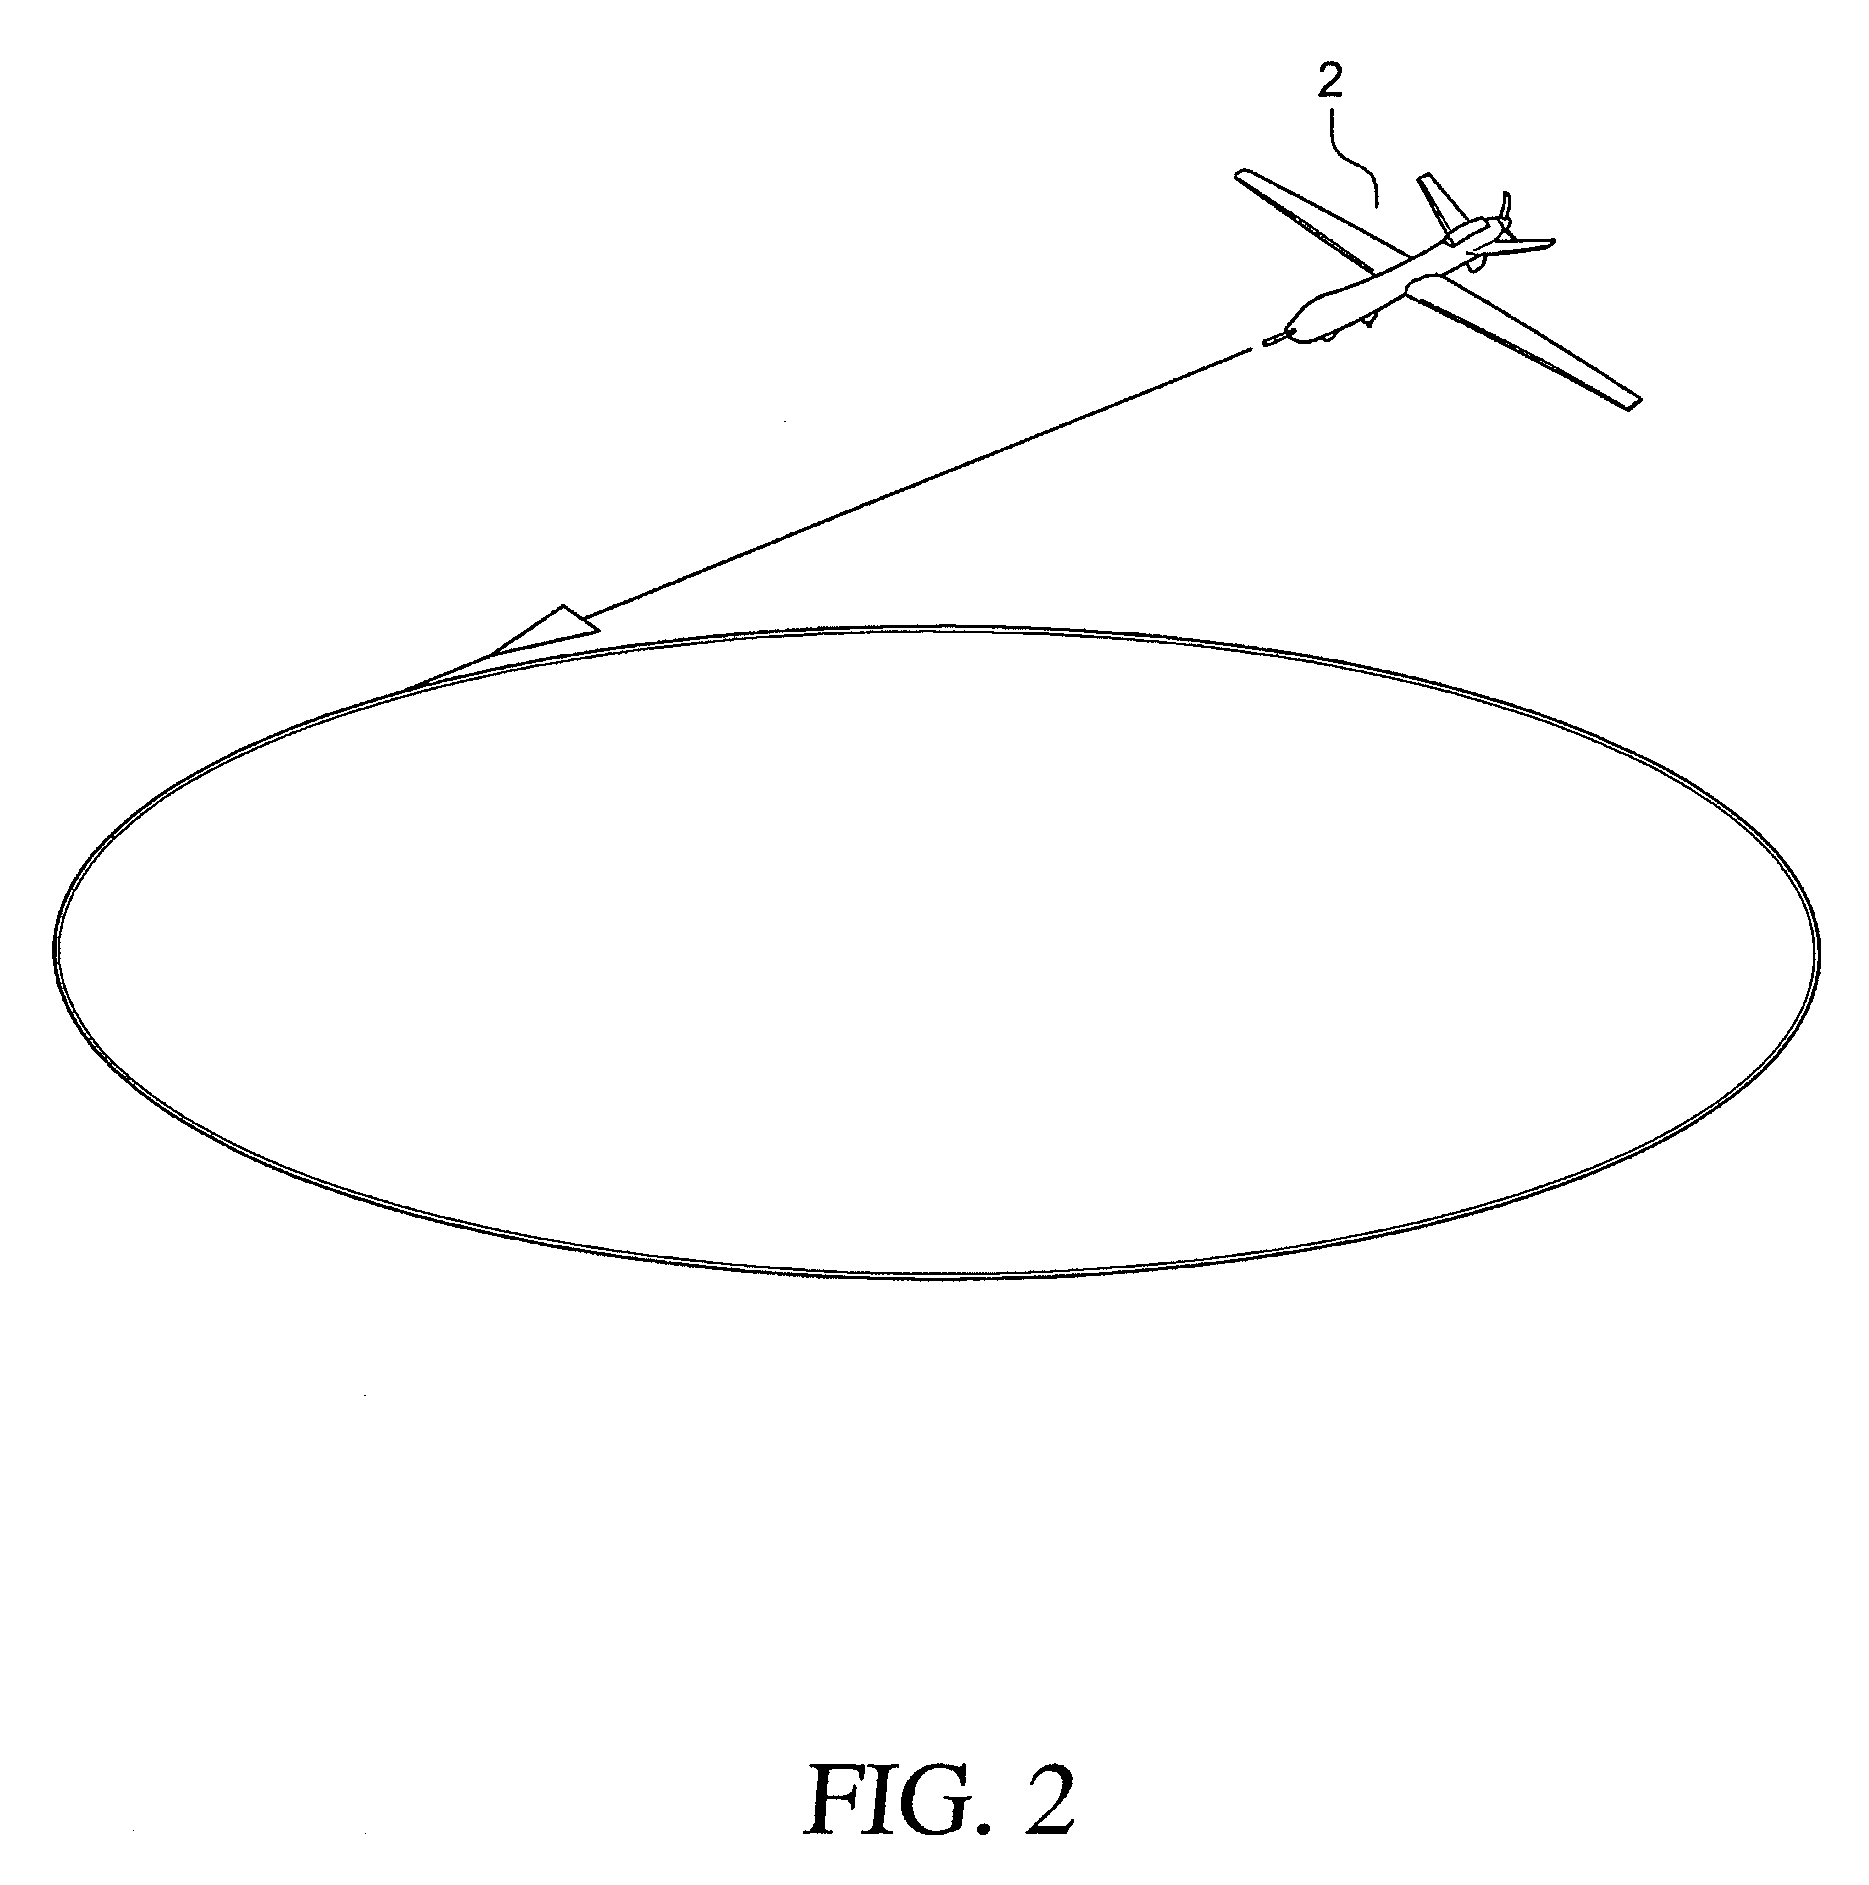 System and method for the retrieval of a smaller unmanned aerial vehicle by a larger unmanned aerial vehicle